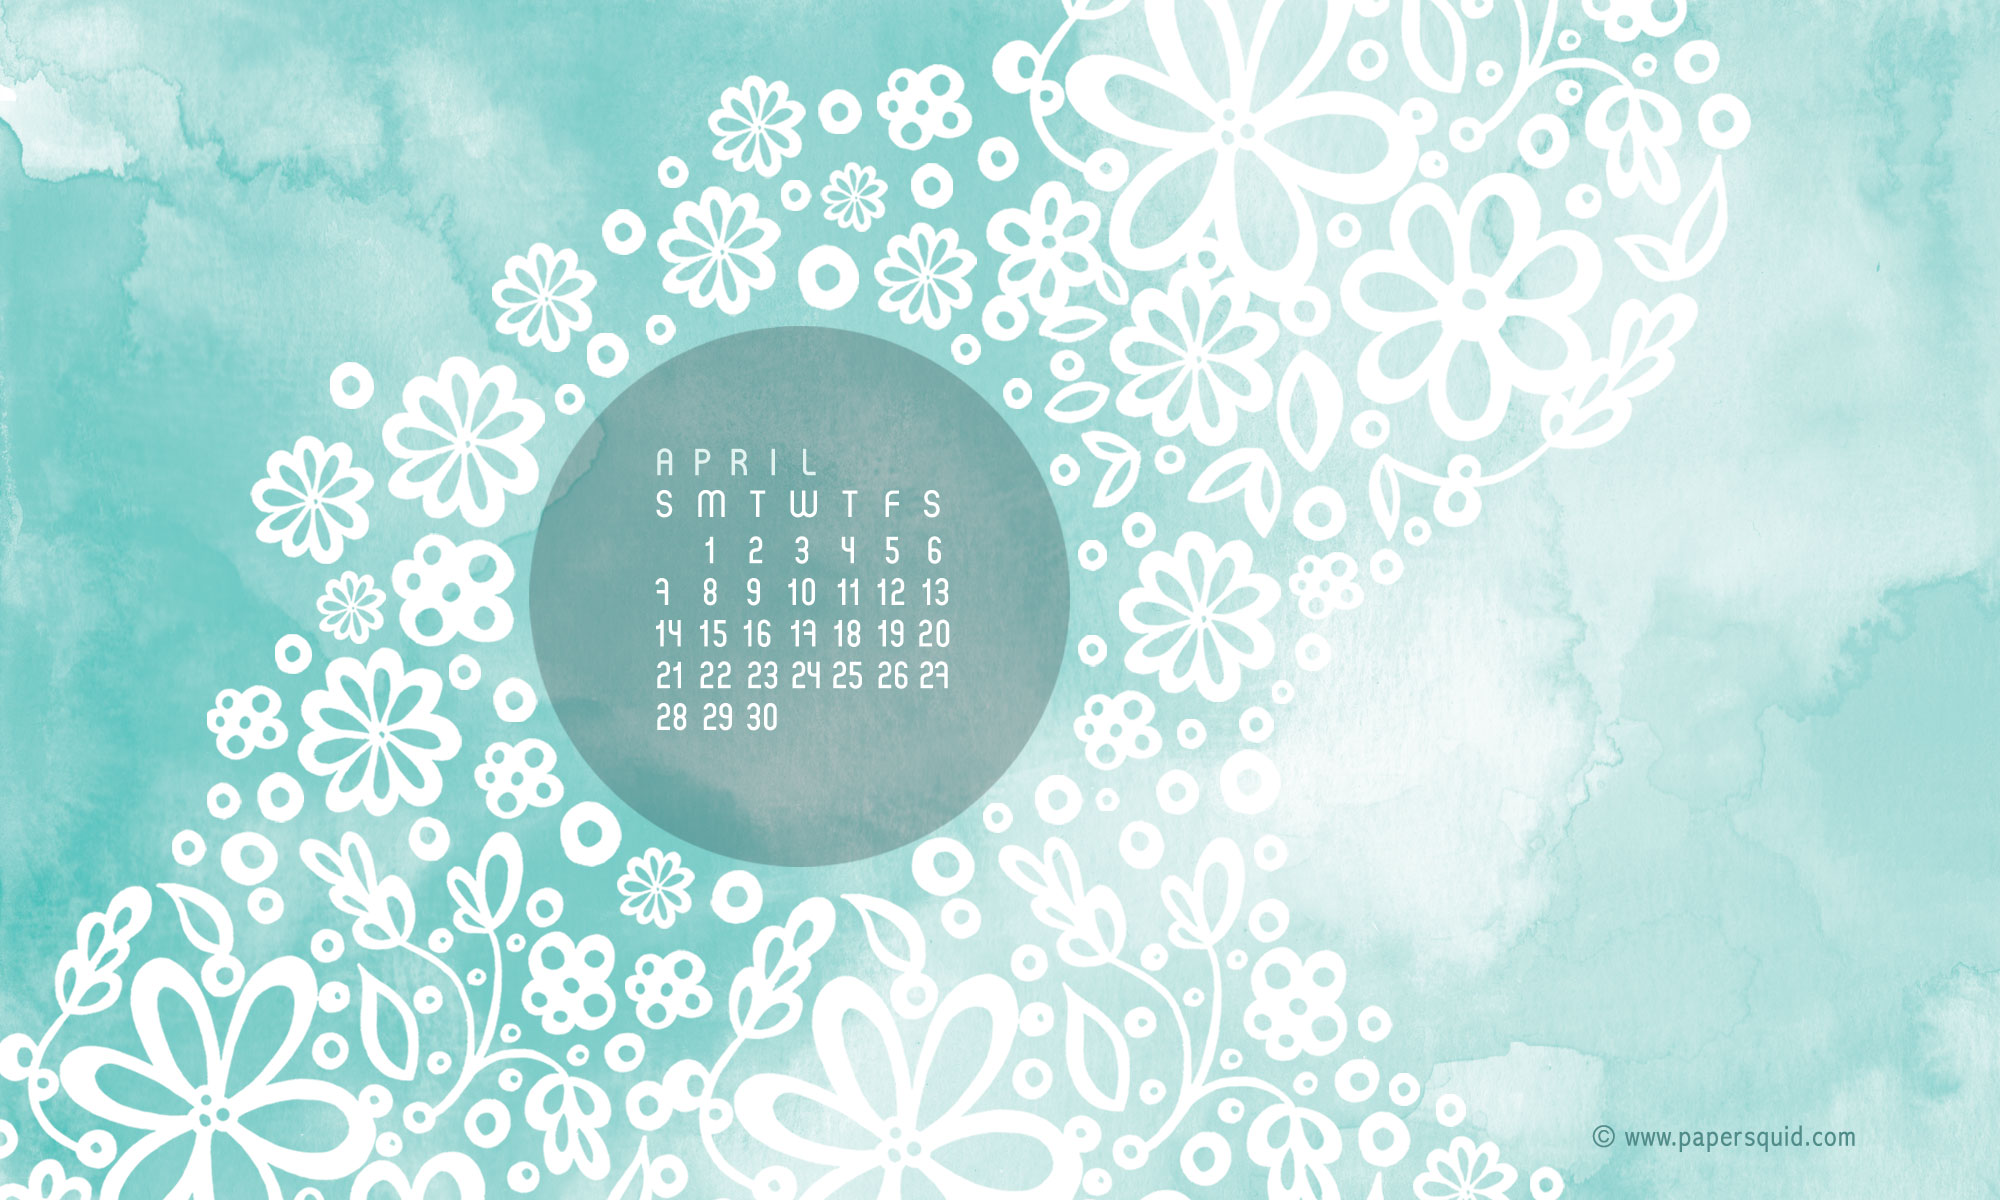 As promised Ive started a monthly desktop wallpaper calendar that I